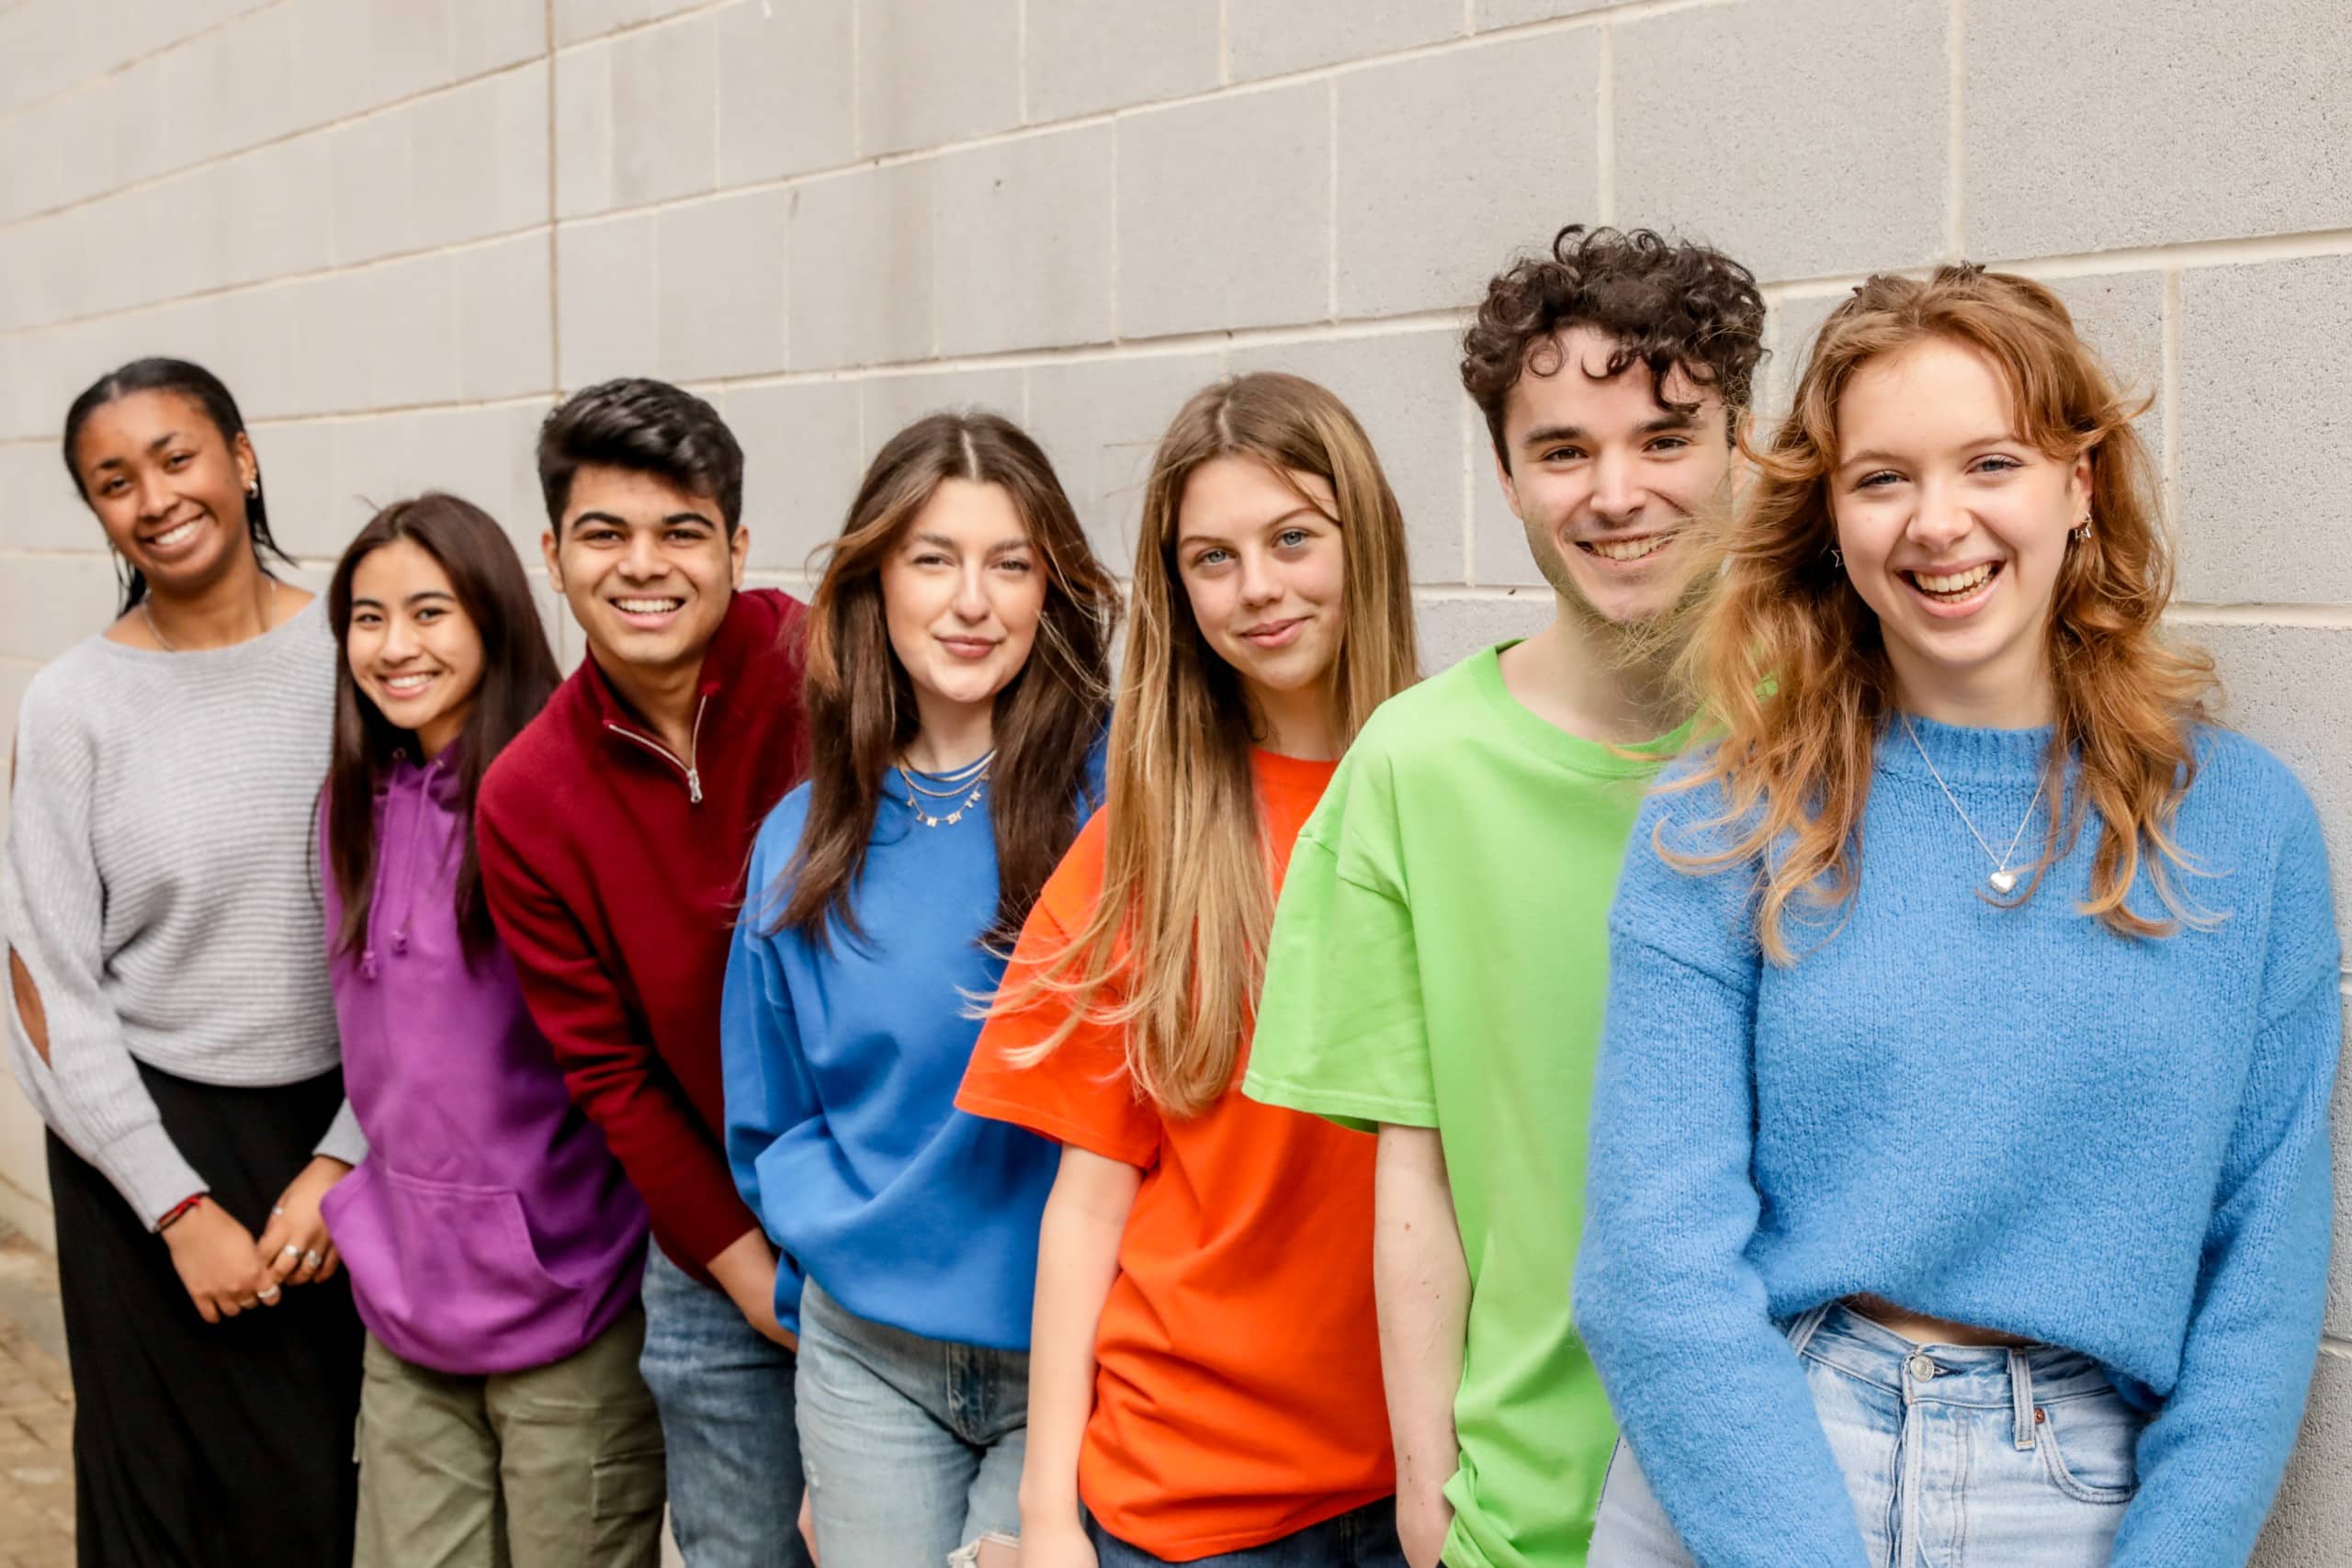 Students standing against grey wall with bright jumpers on